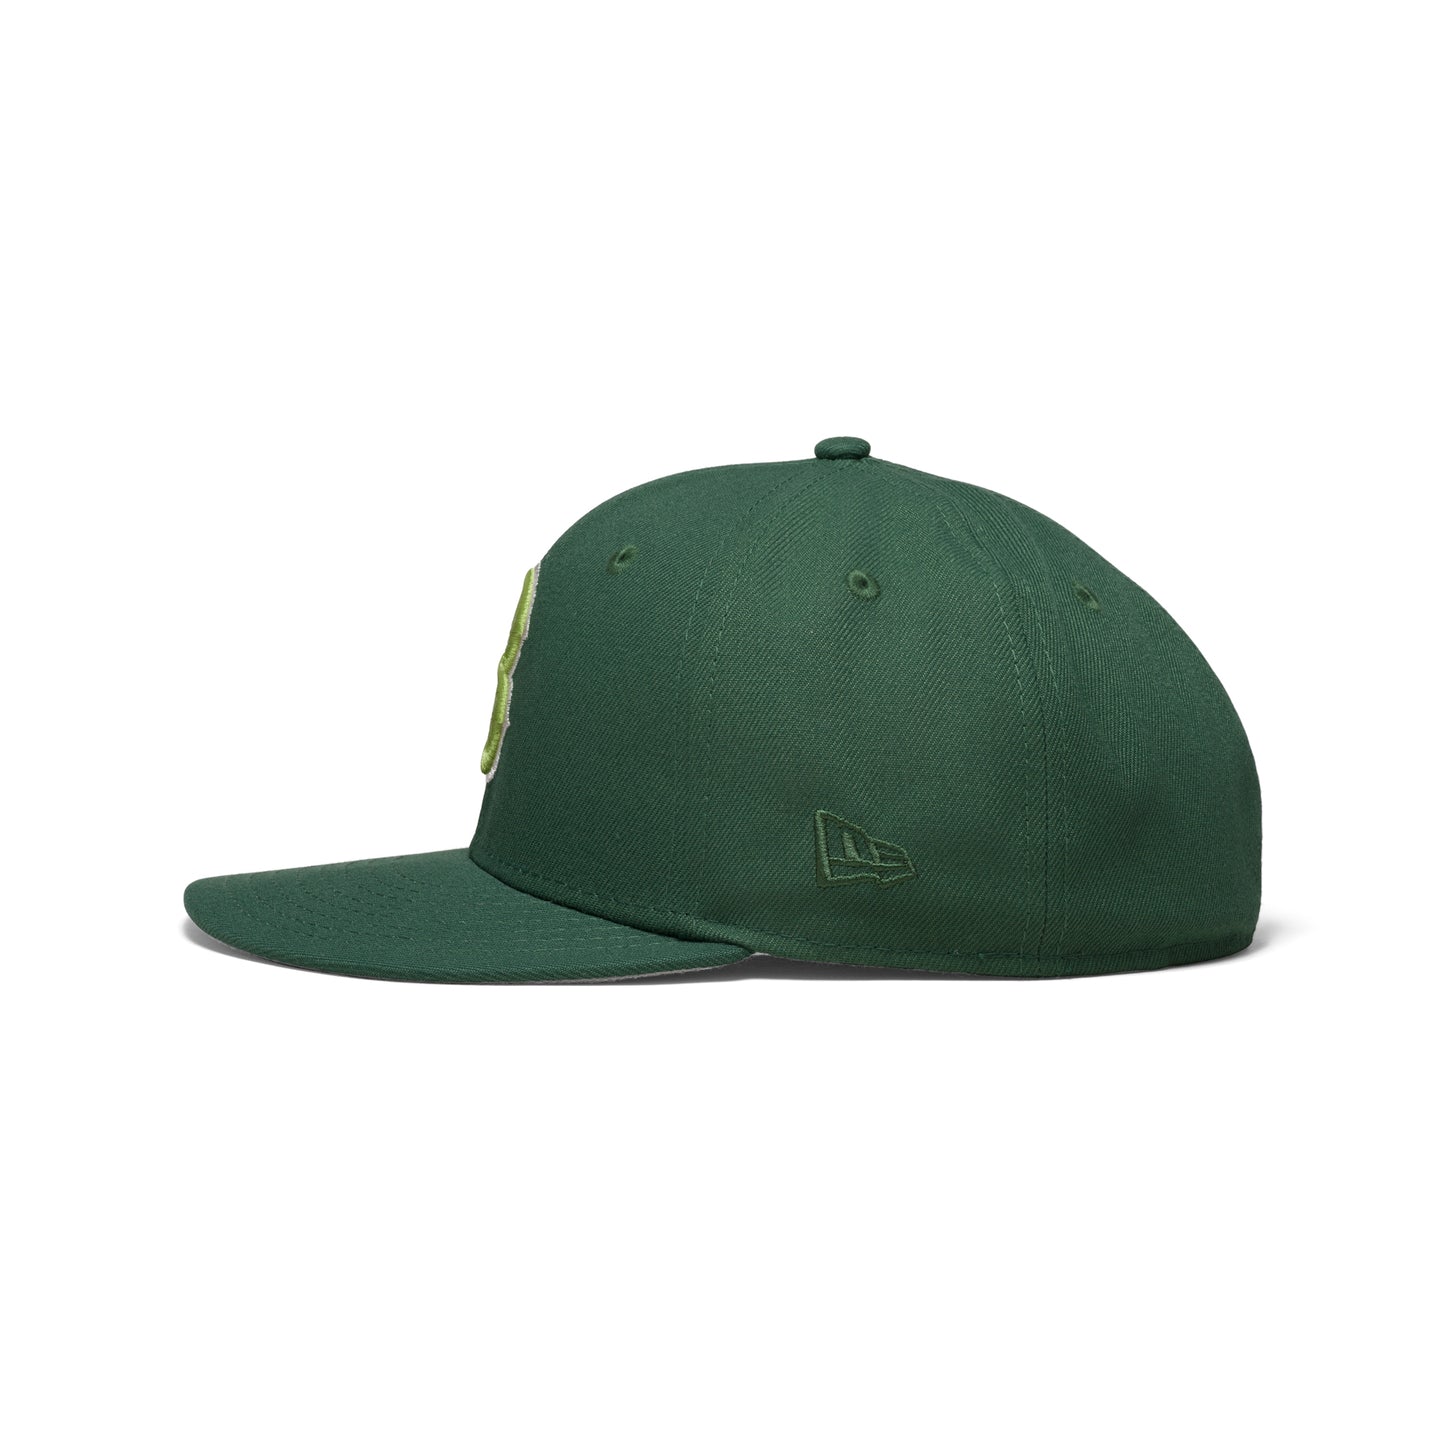 Concepts x New Era 5950 Boston Red Sox 99 All Star Game Fitted Hat (Green)